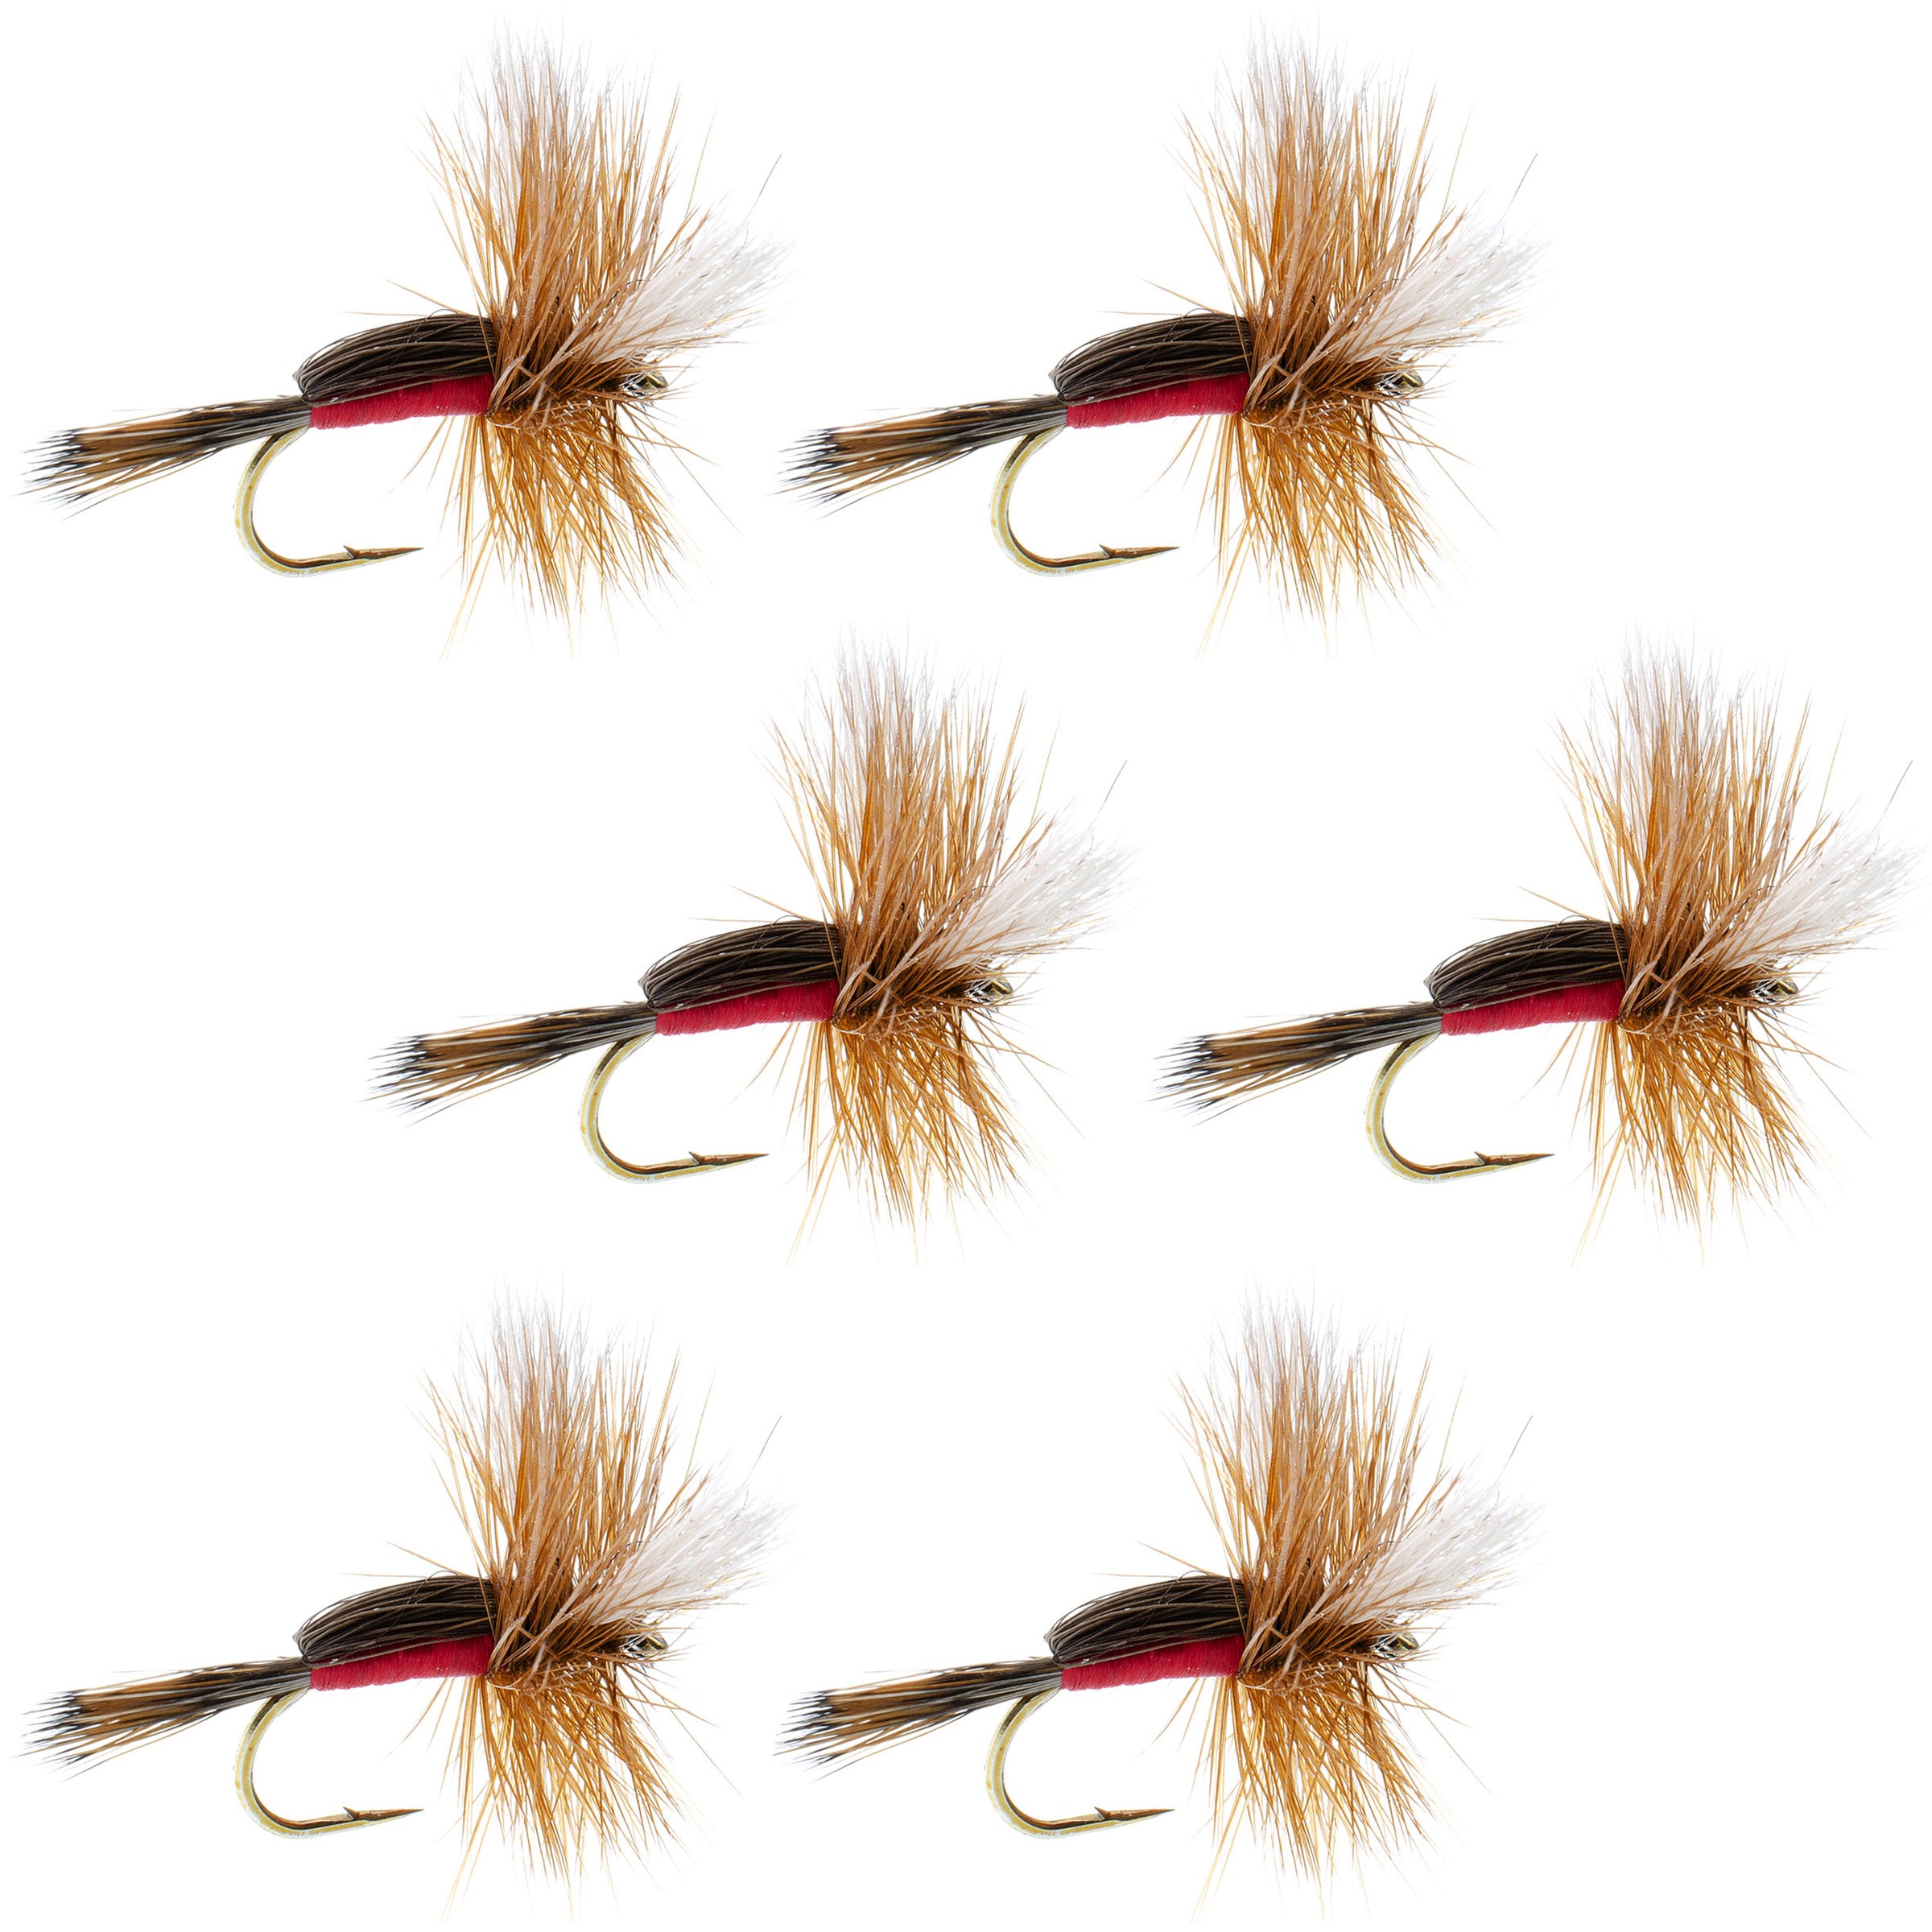 Royal Humpy Classic Hair Wing Dry Fly - 6 Flies Hook Size 16